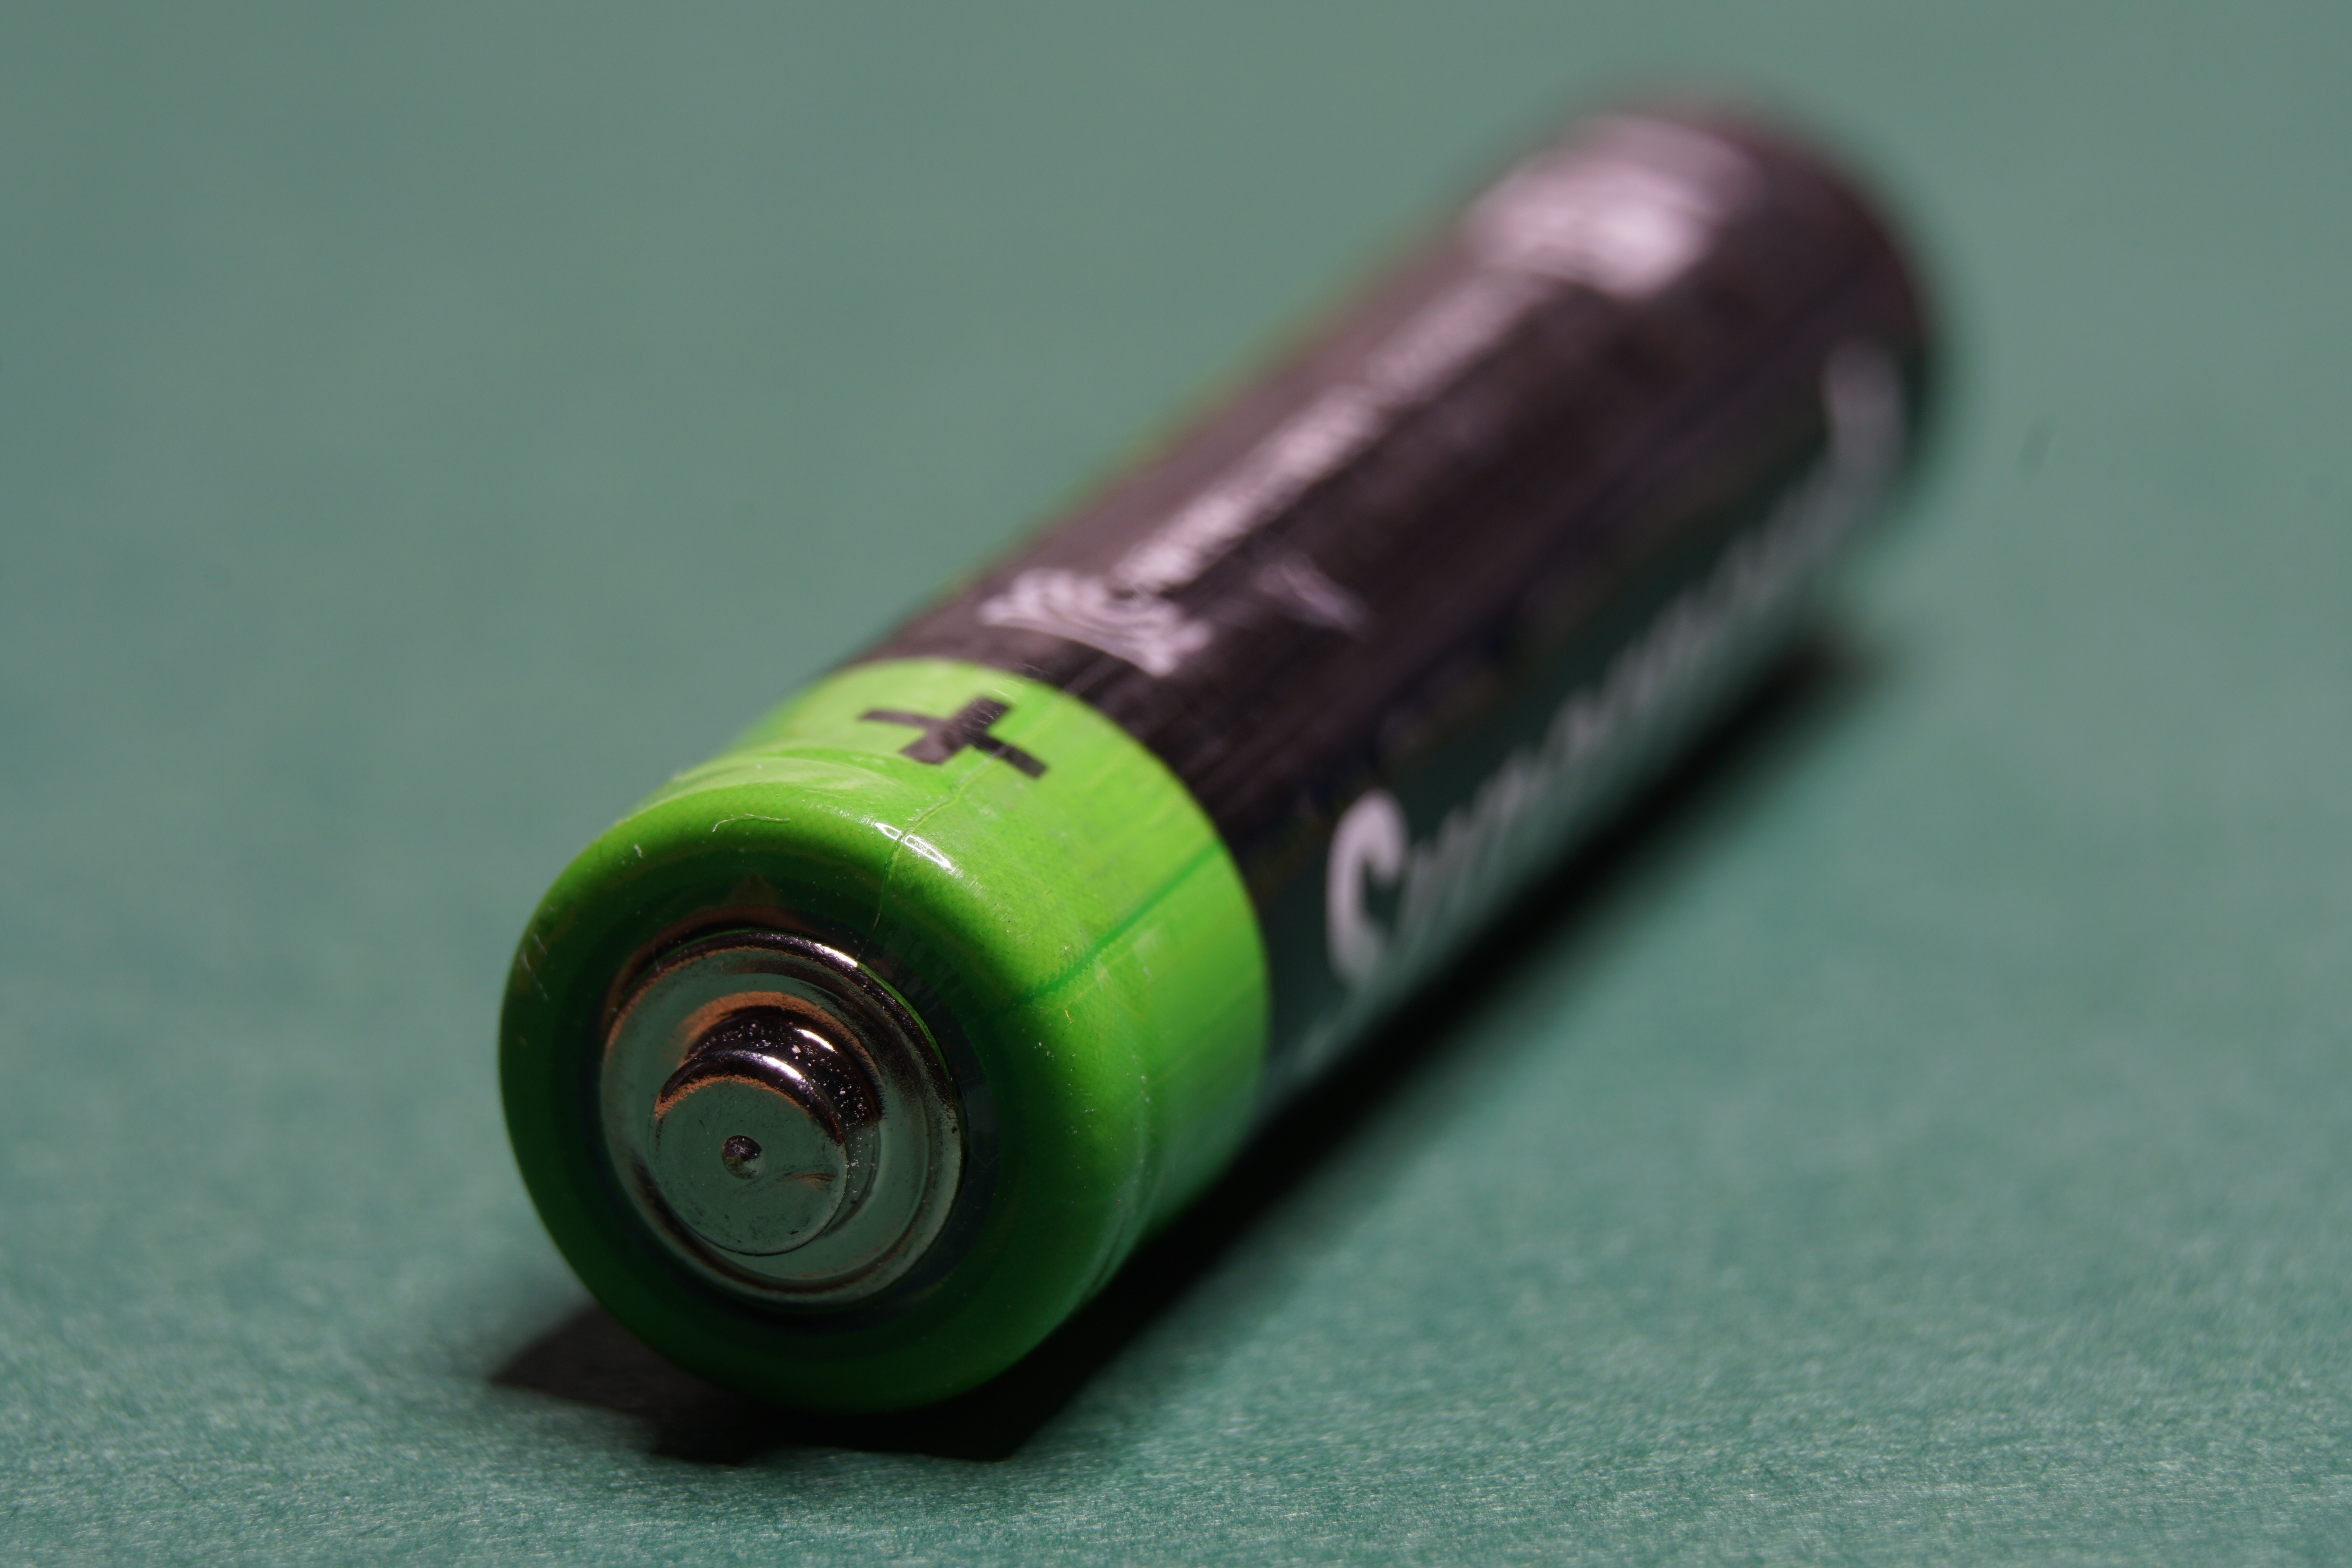 Small battery up close